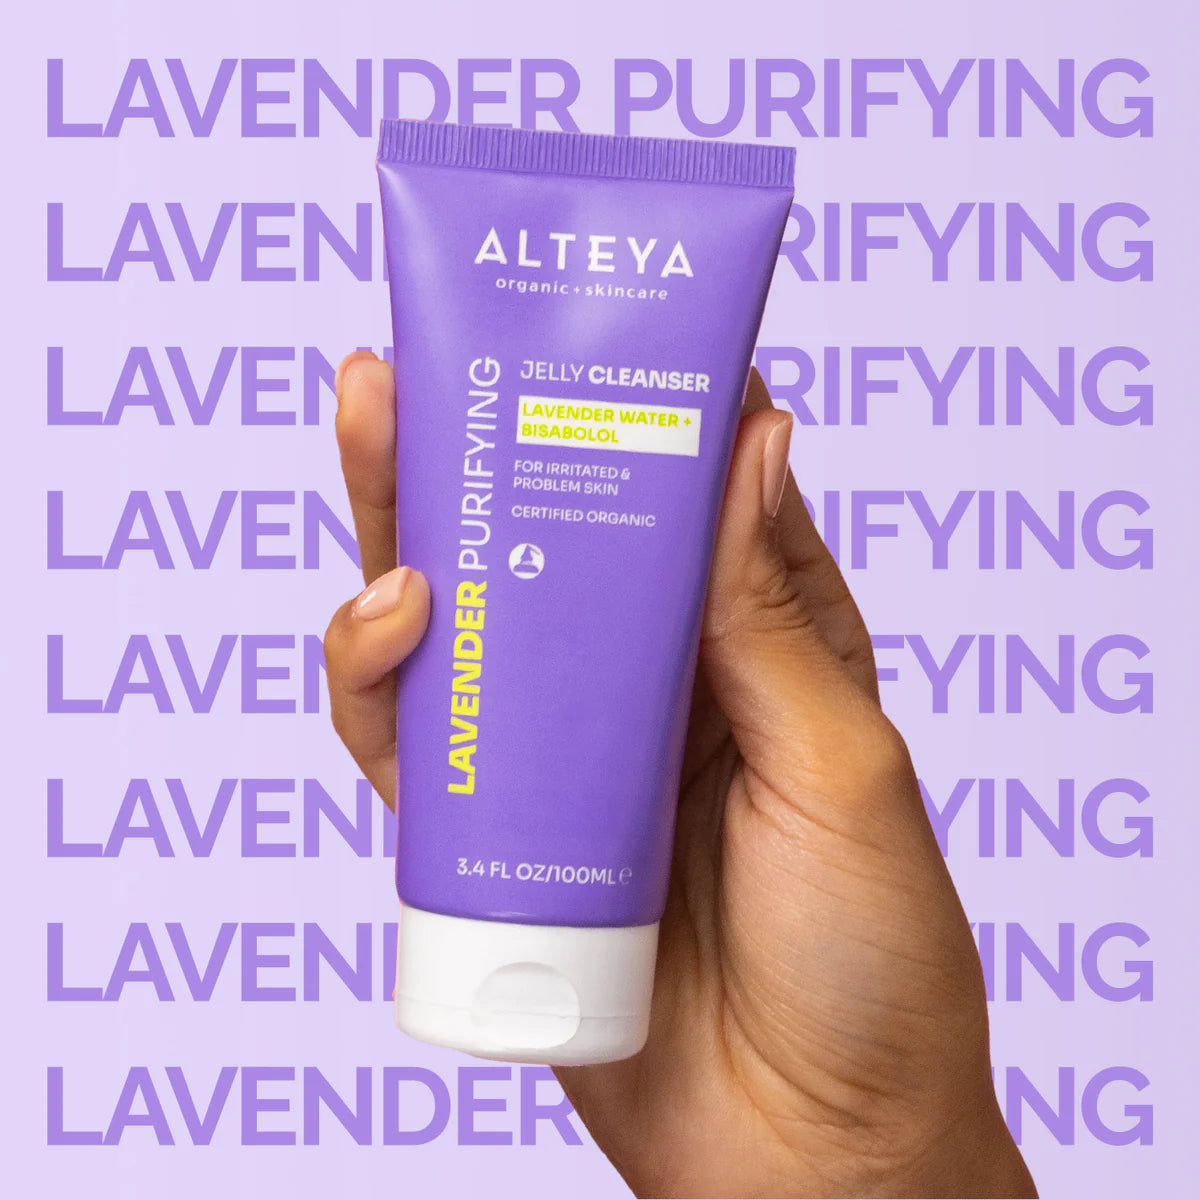 A person displaying Alteya Organics' Lavender Purifying Jelly Cleanser, enriched with organic lavender water and bisabolol.